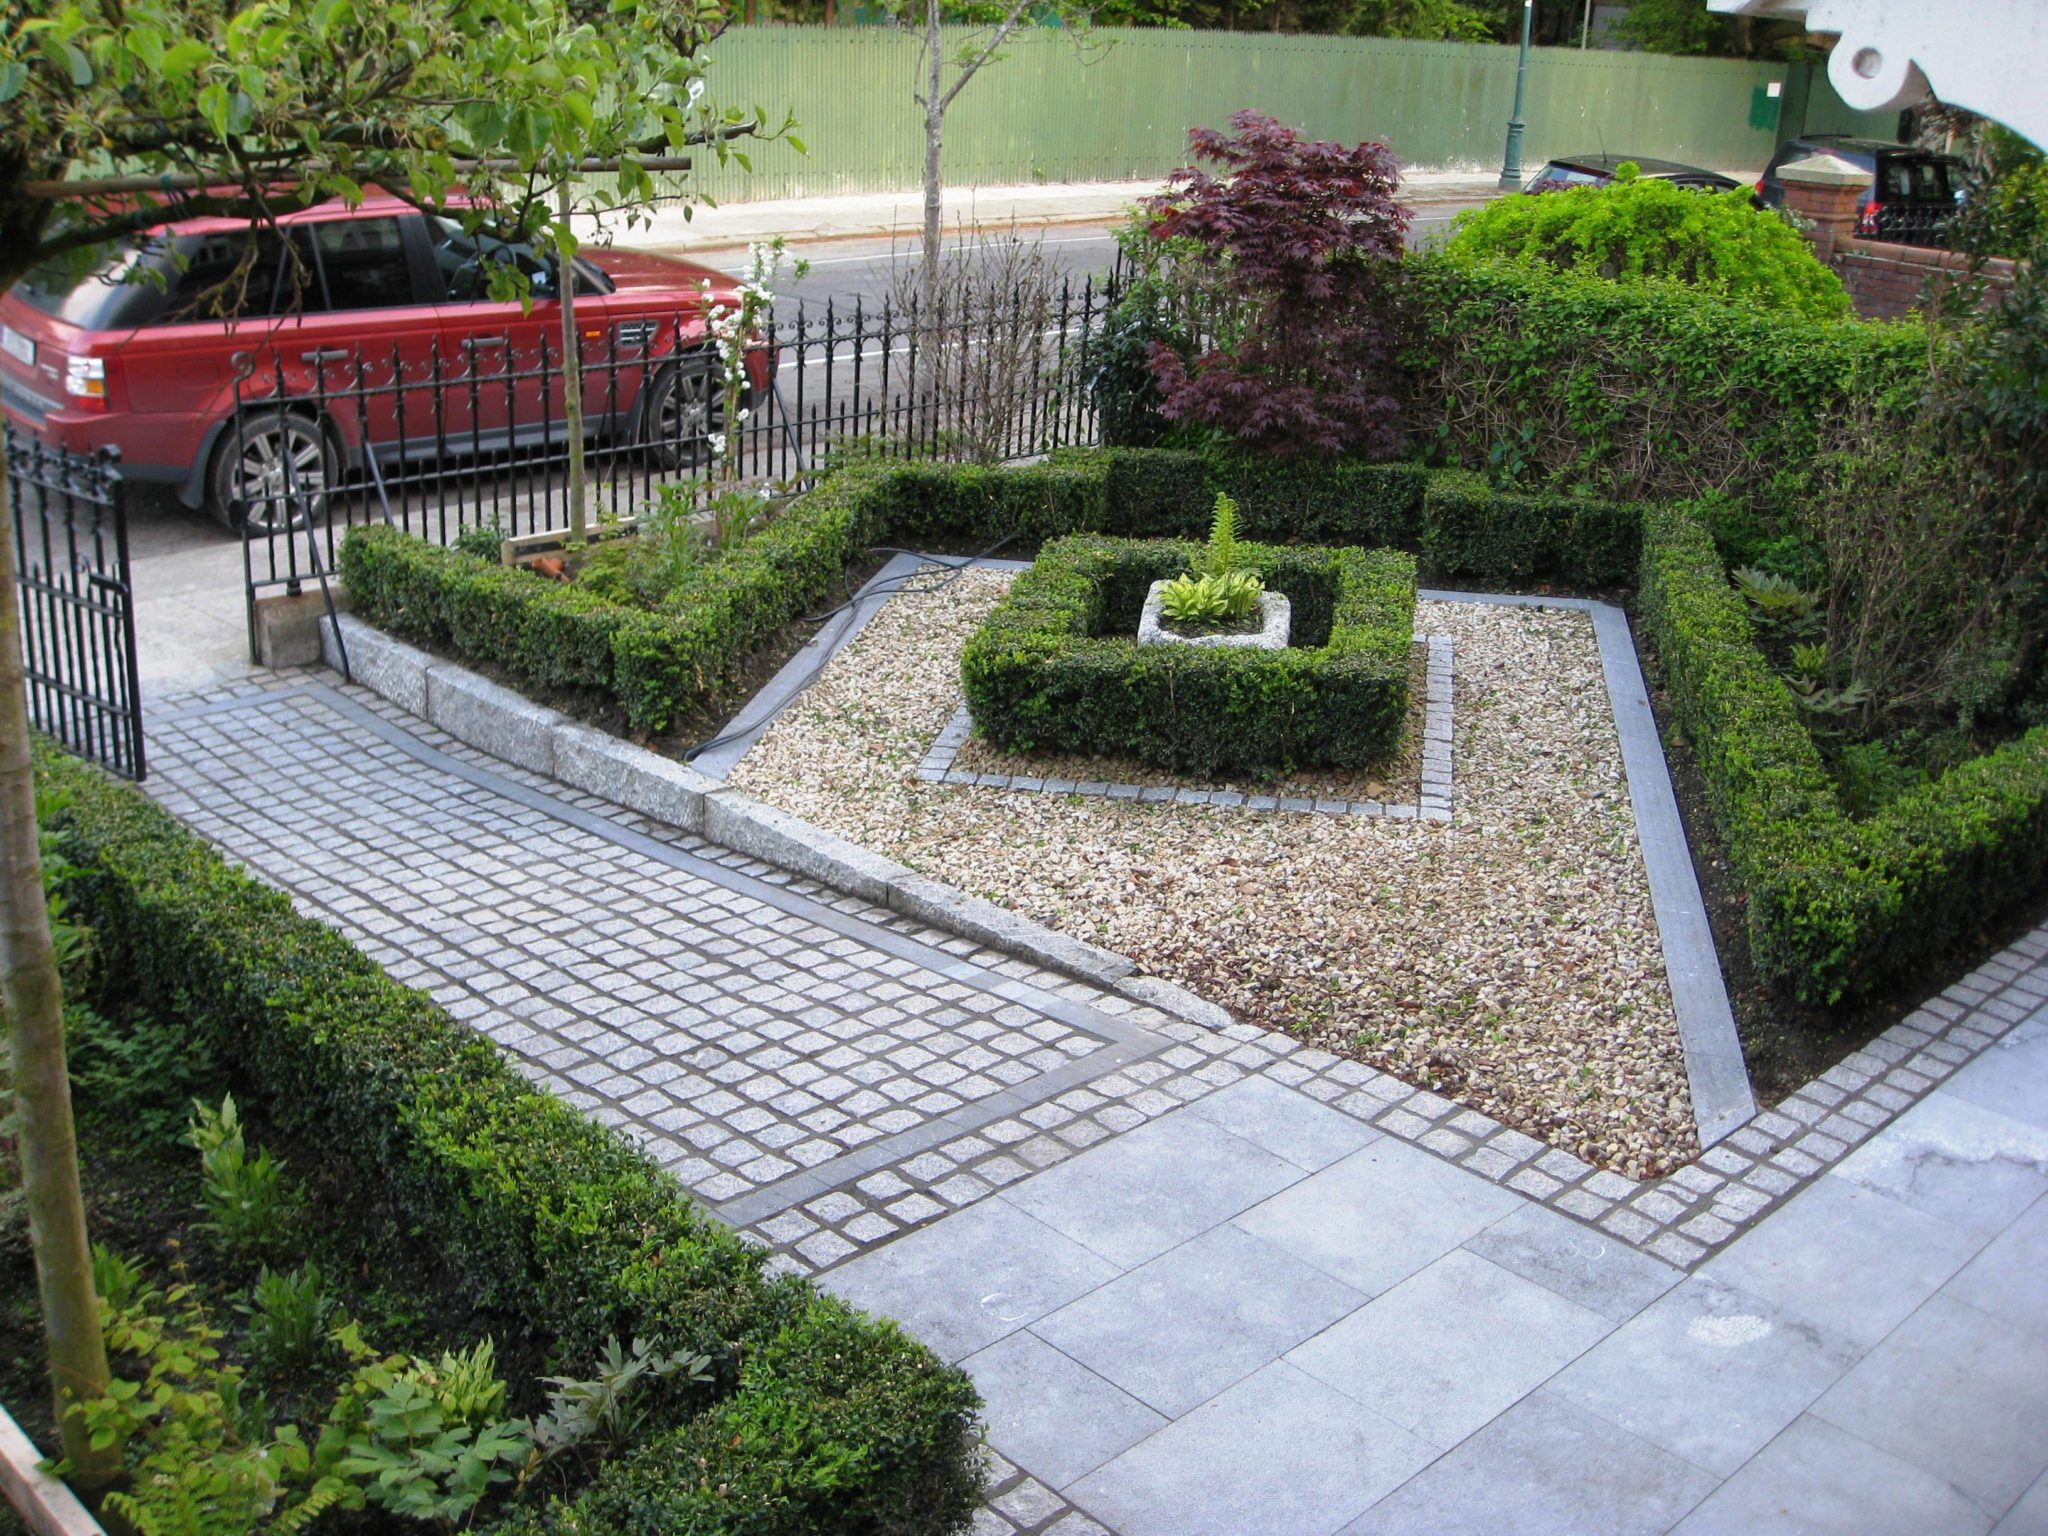  front garden designs and layouts